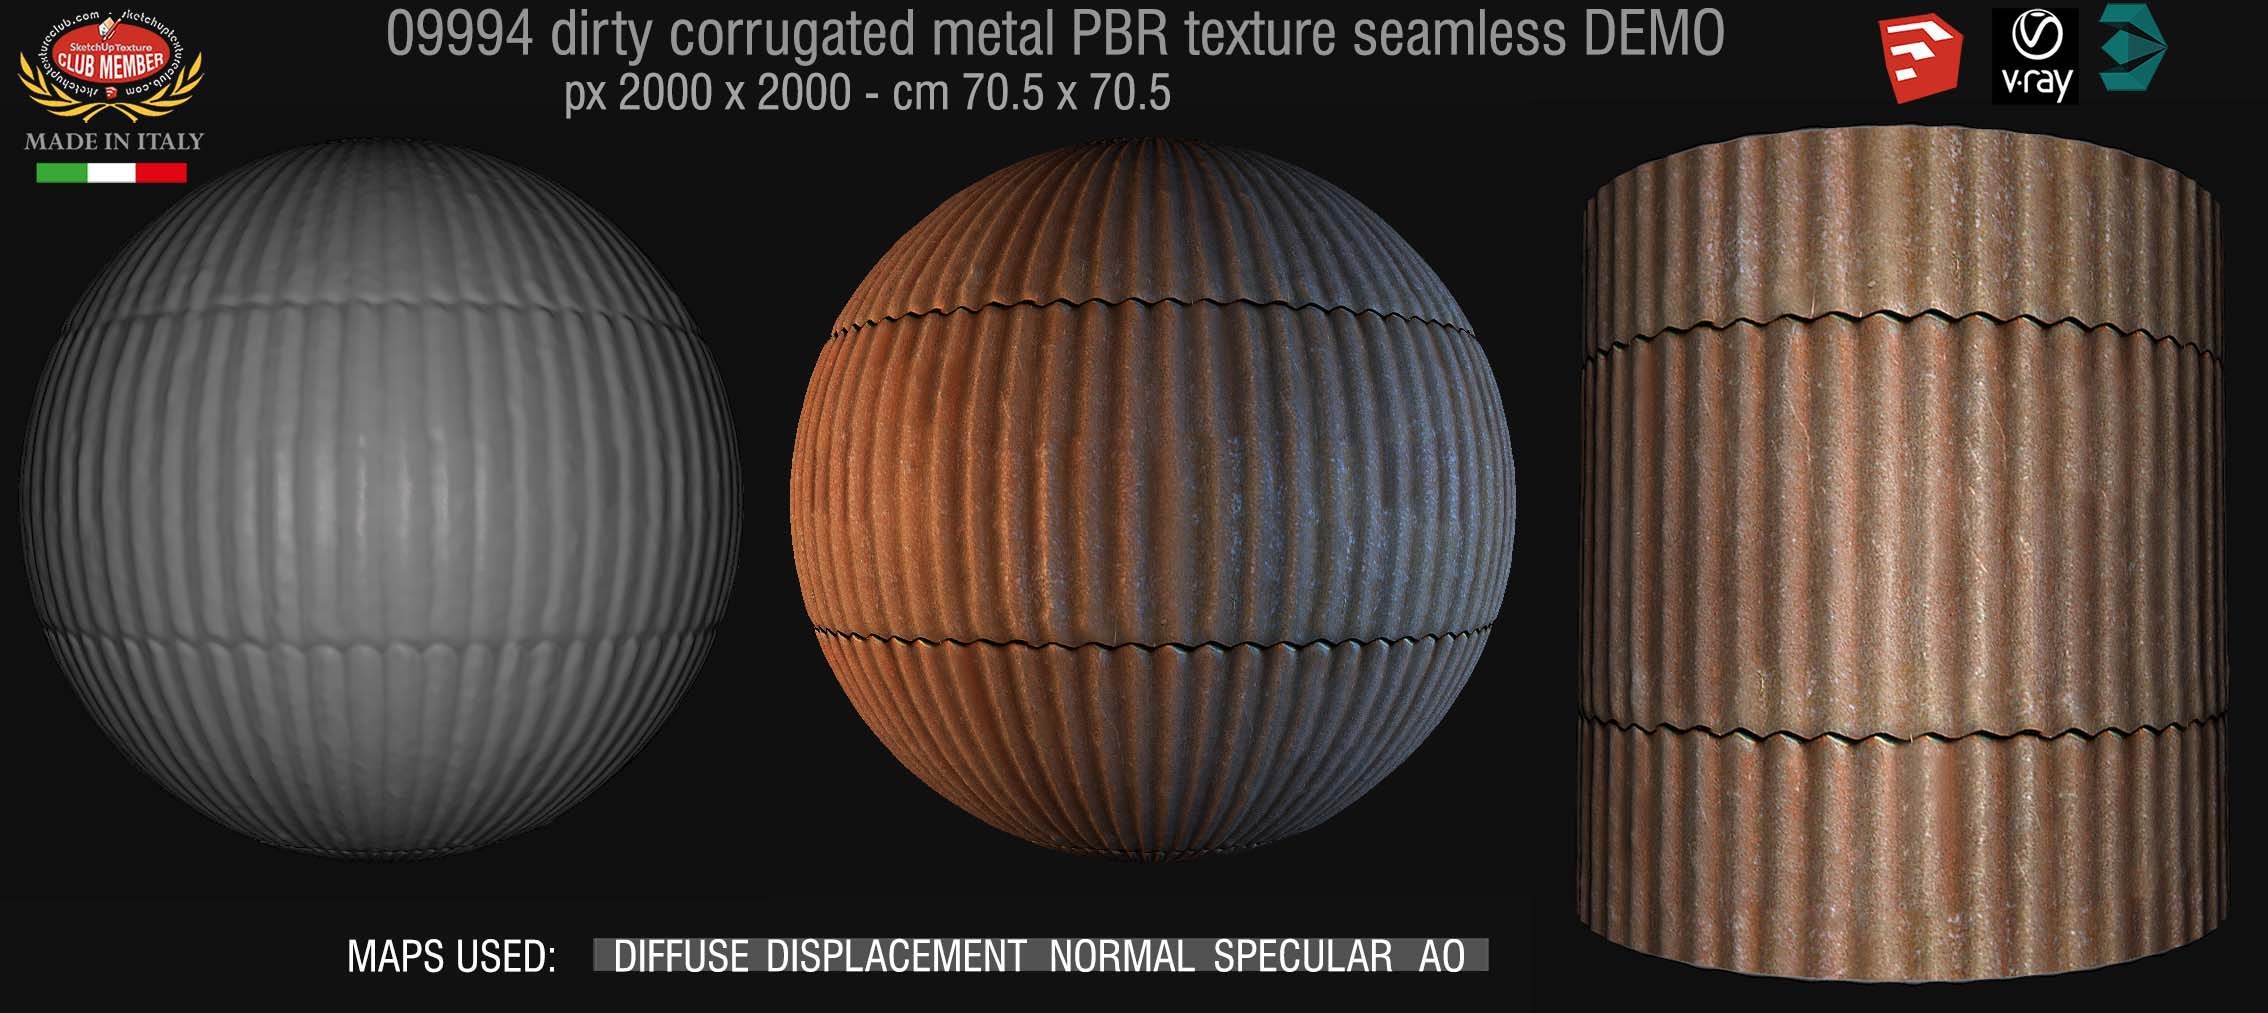 09994 Dirty corrugated metal PBR texture seamless DEMO